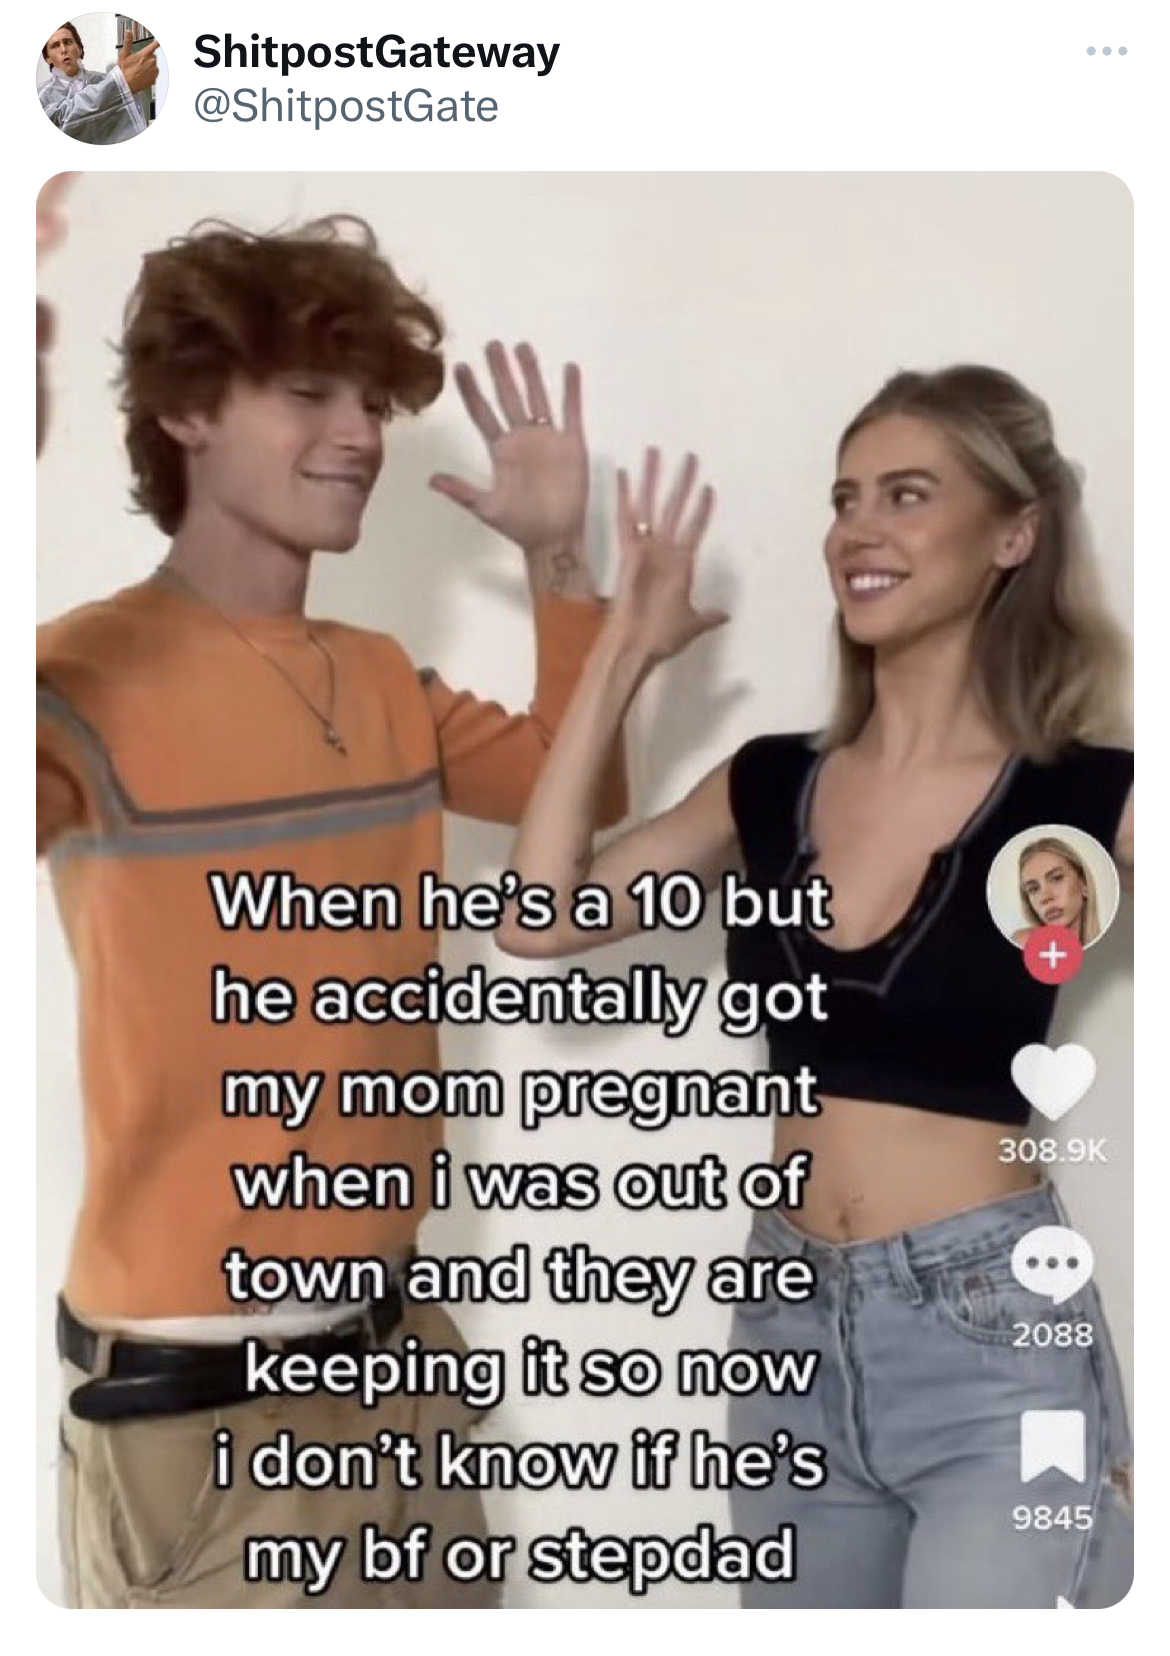 hall of fame tweets -wild tiktok screenshot meme - ShitpostGateway When he's a 10 but he accidentally got my mom pregnant when i was out of town and they are keeping it so now i don't know if he's my bf or stepdad 2088 9845